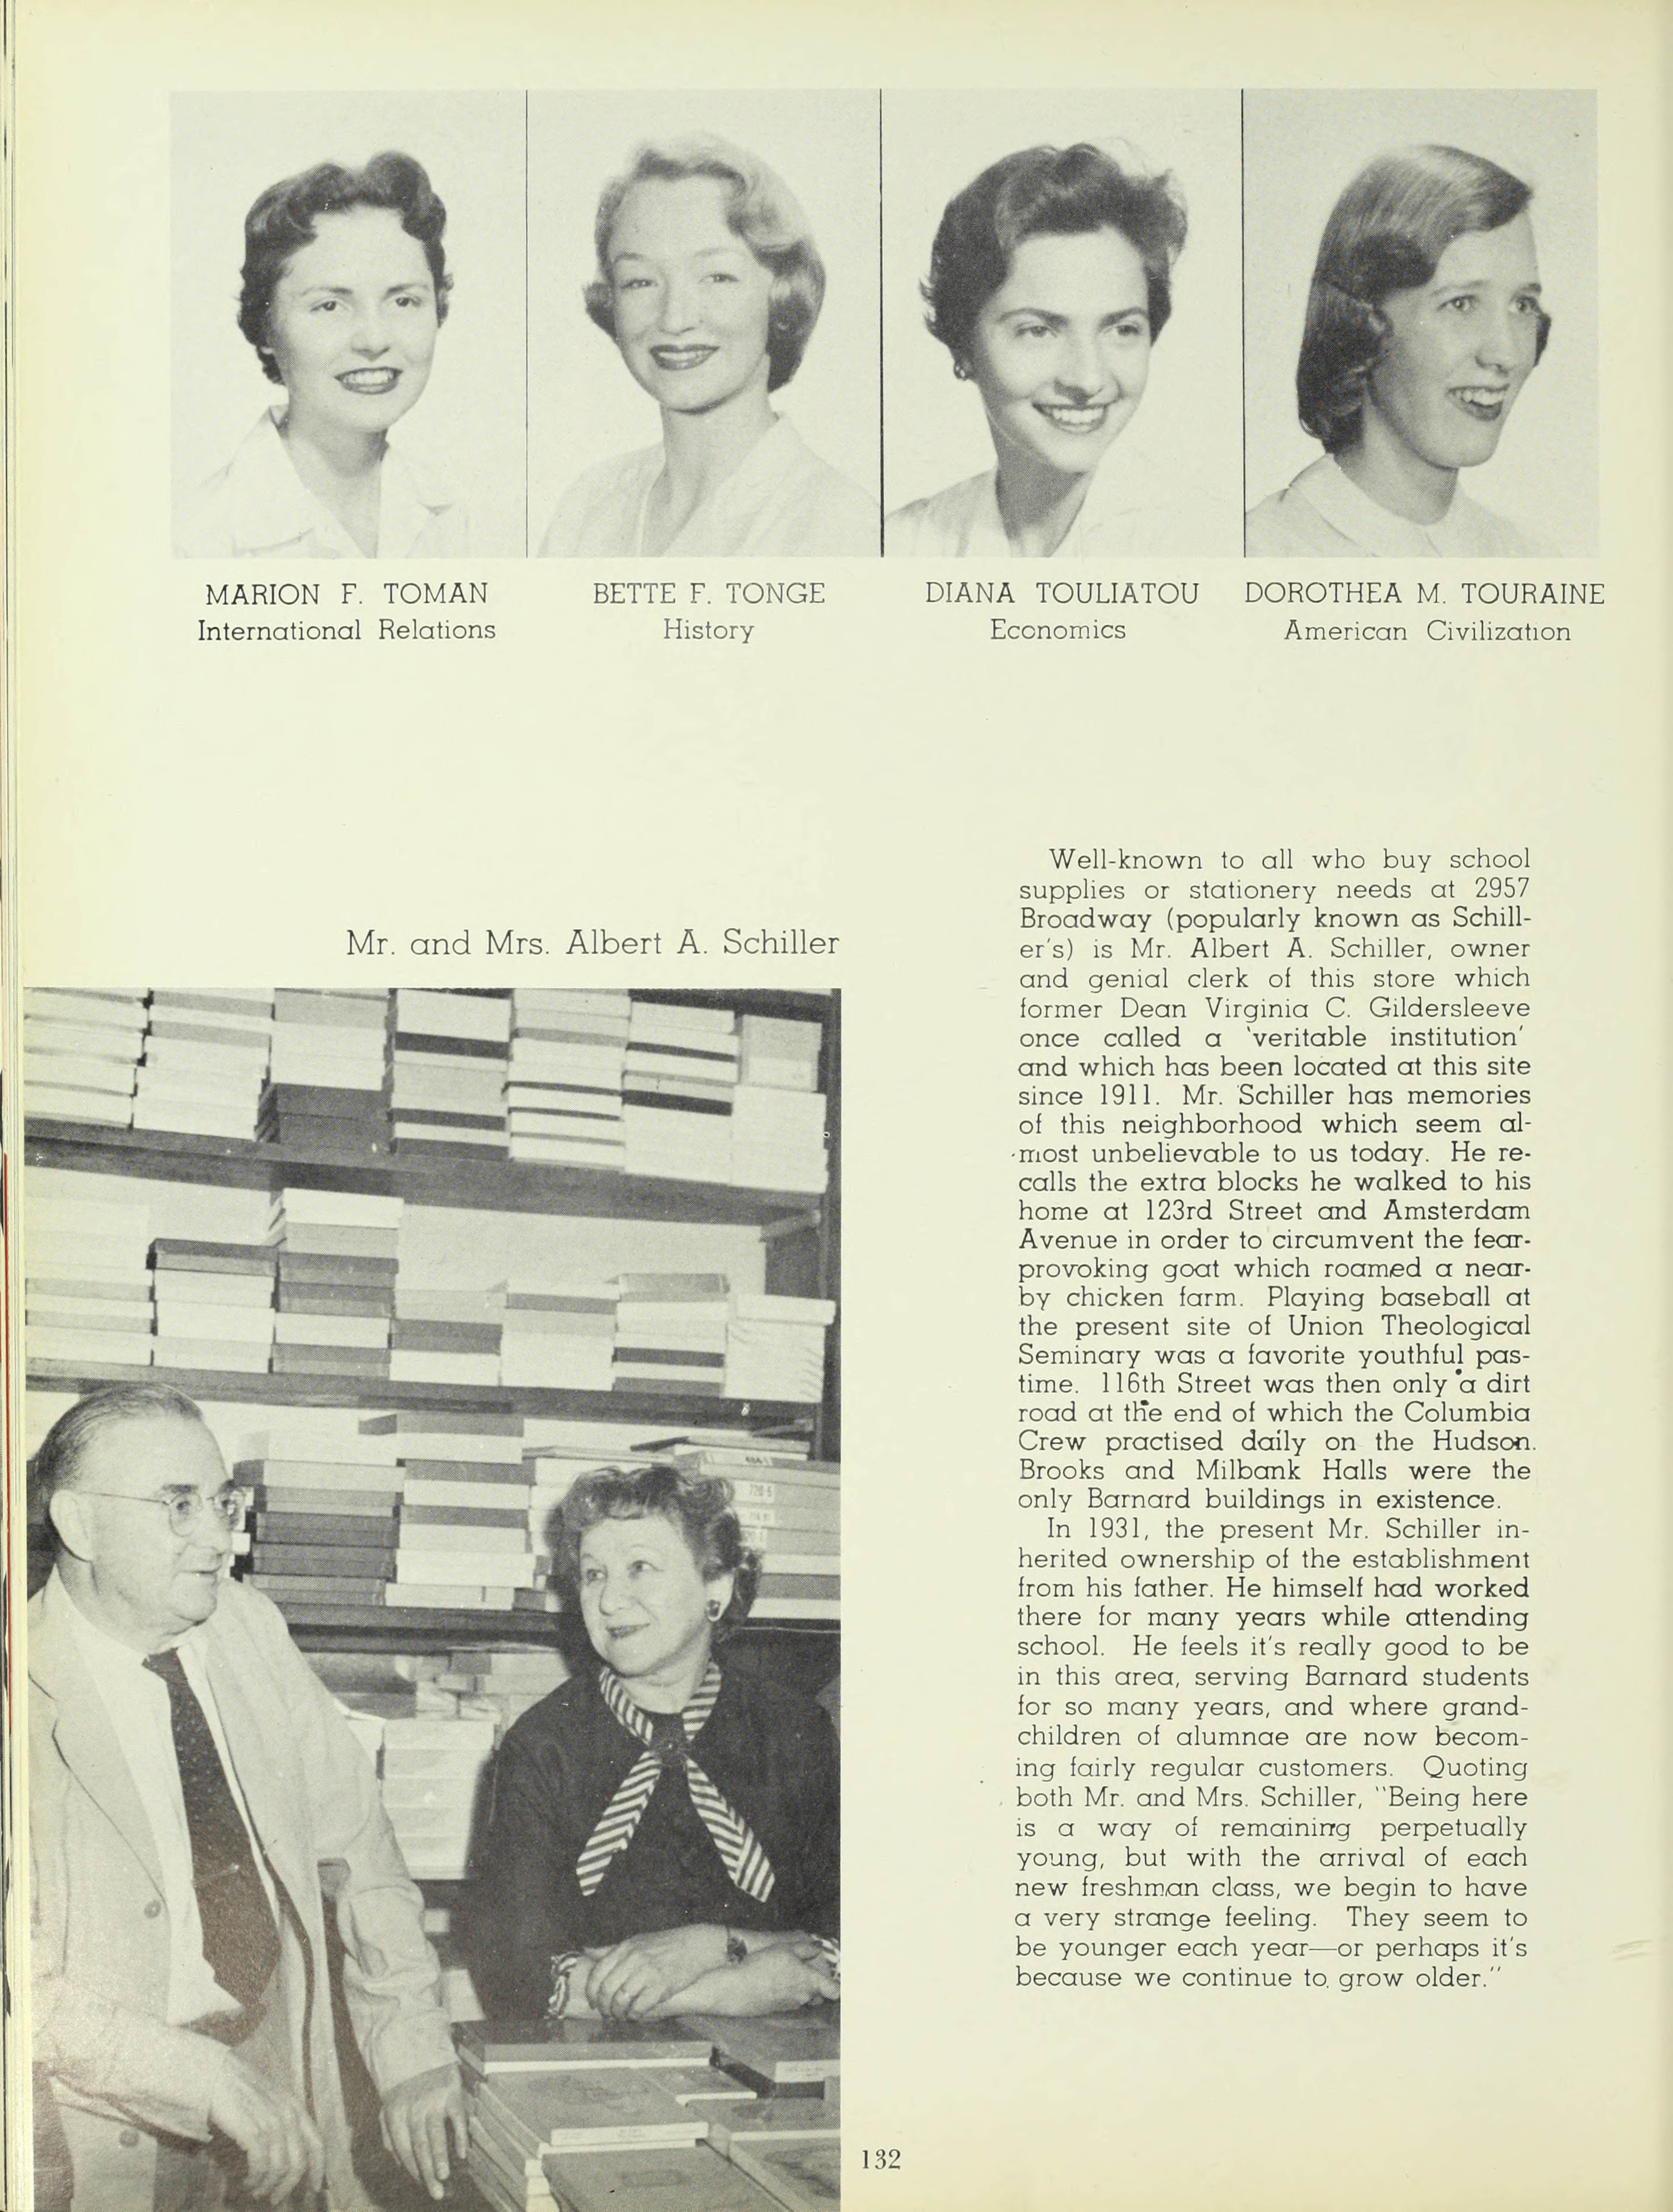 Yearbook clipping of Diana